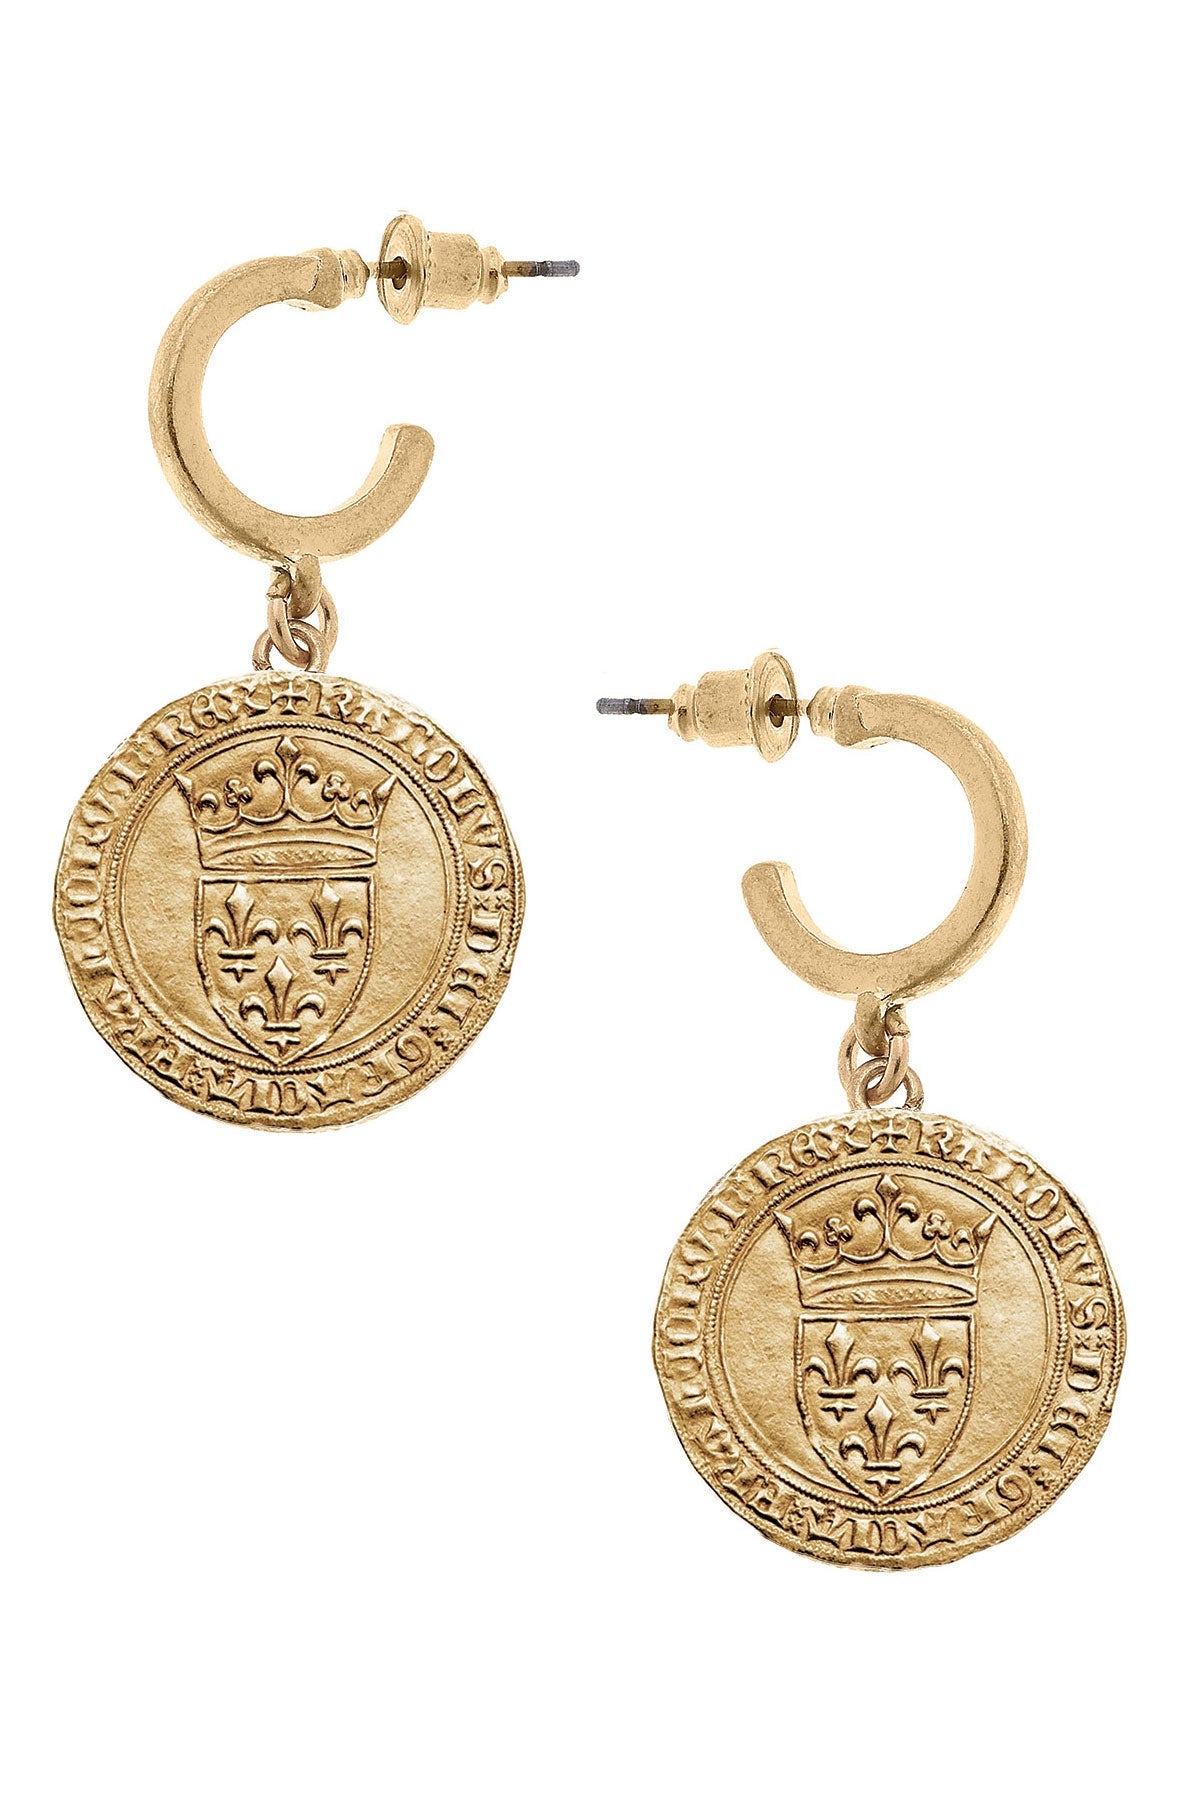 CANVAS Style x MaryCatherineStudio French Coin Drop Hoop Earrings in Worn Gold